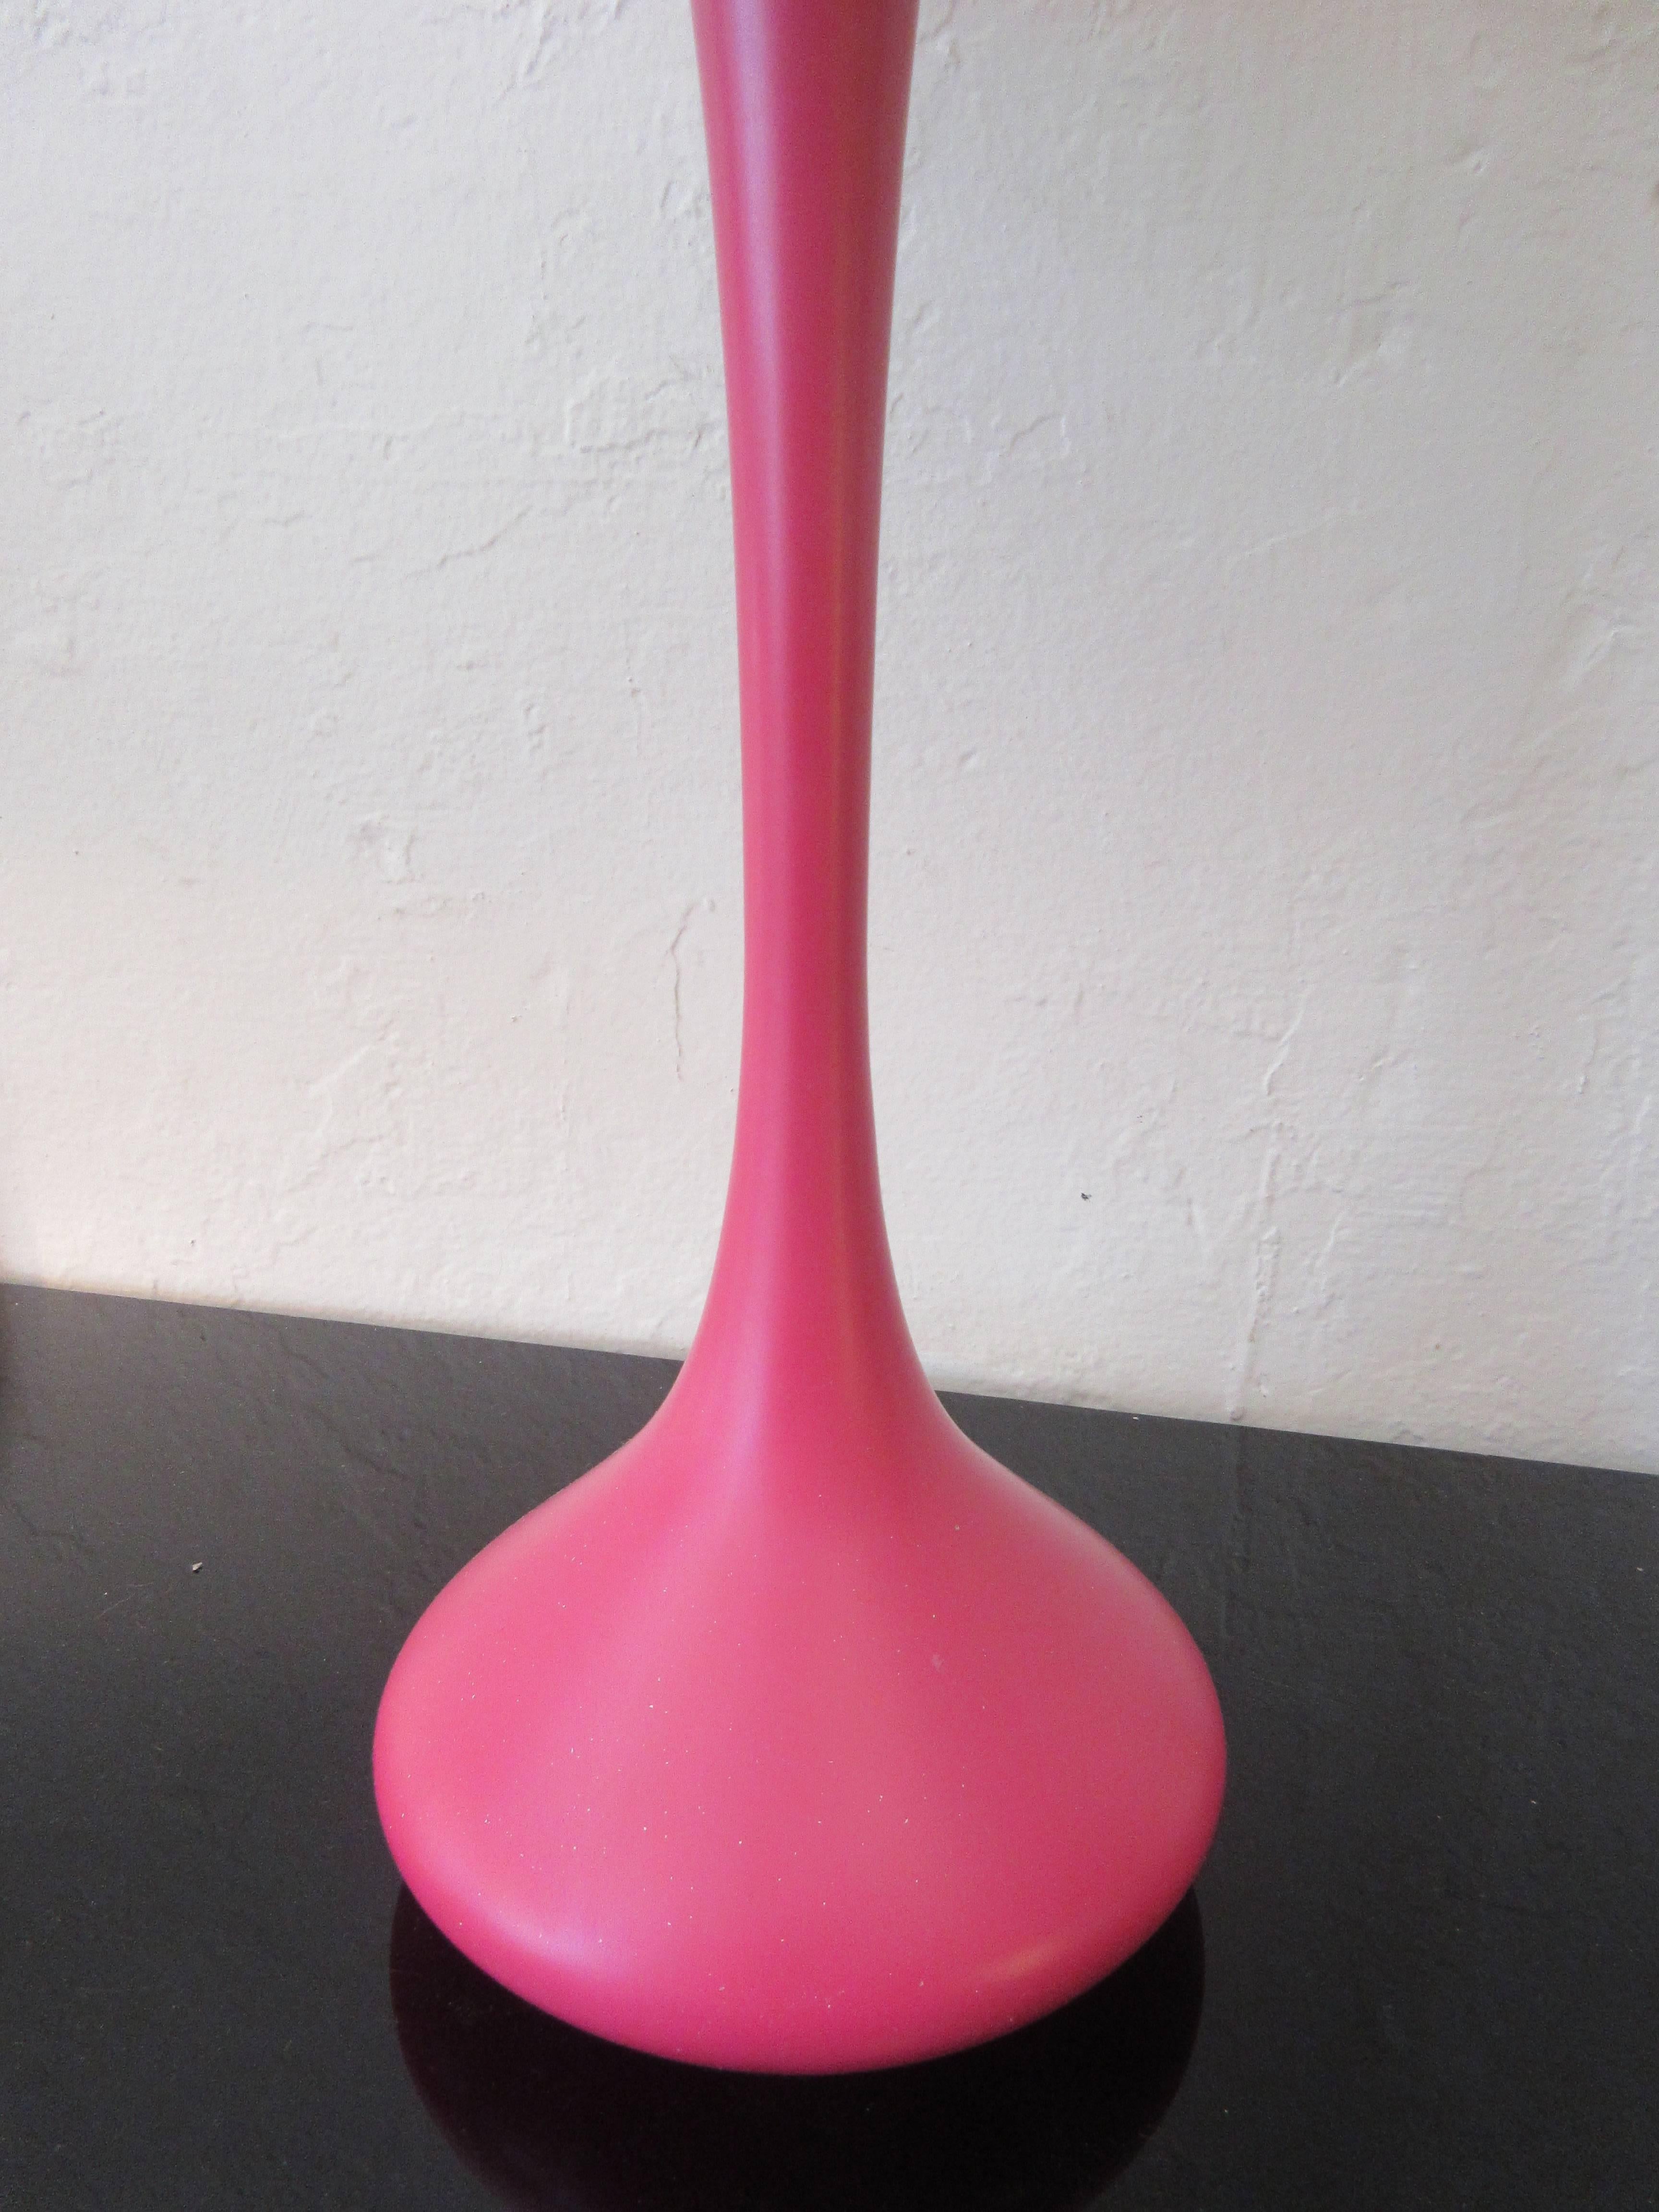 Bright pink or magenta Laurel genie lamp with original shade. Base and shade shows a little paint loss as shown, but great original color not often seen!